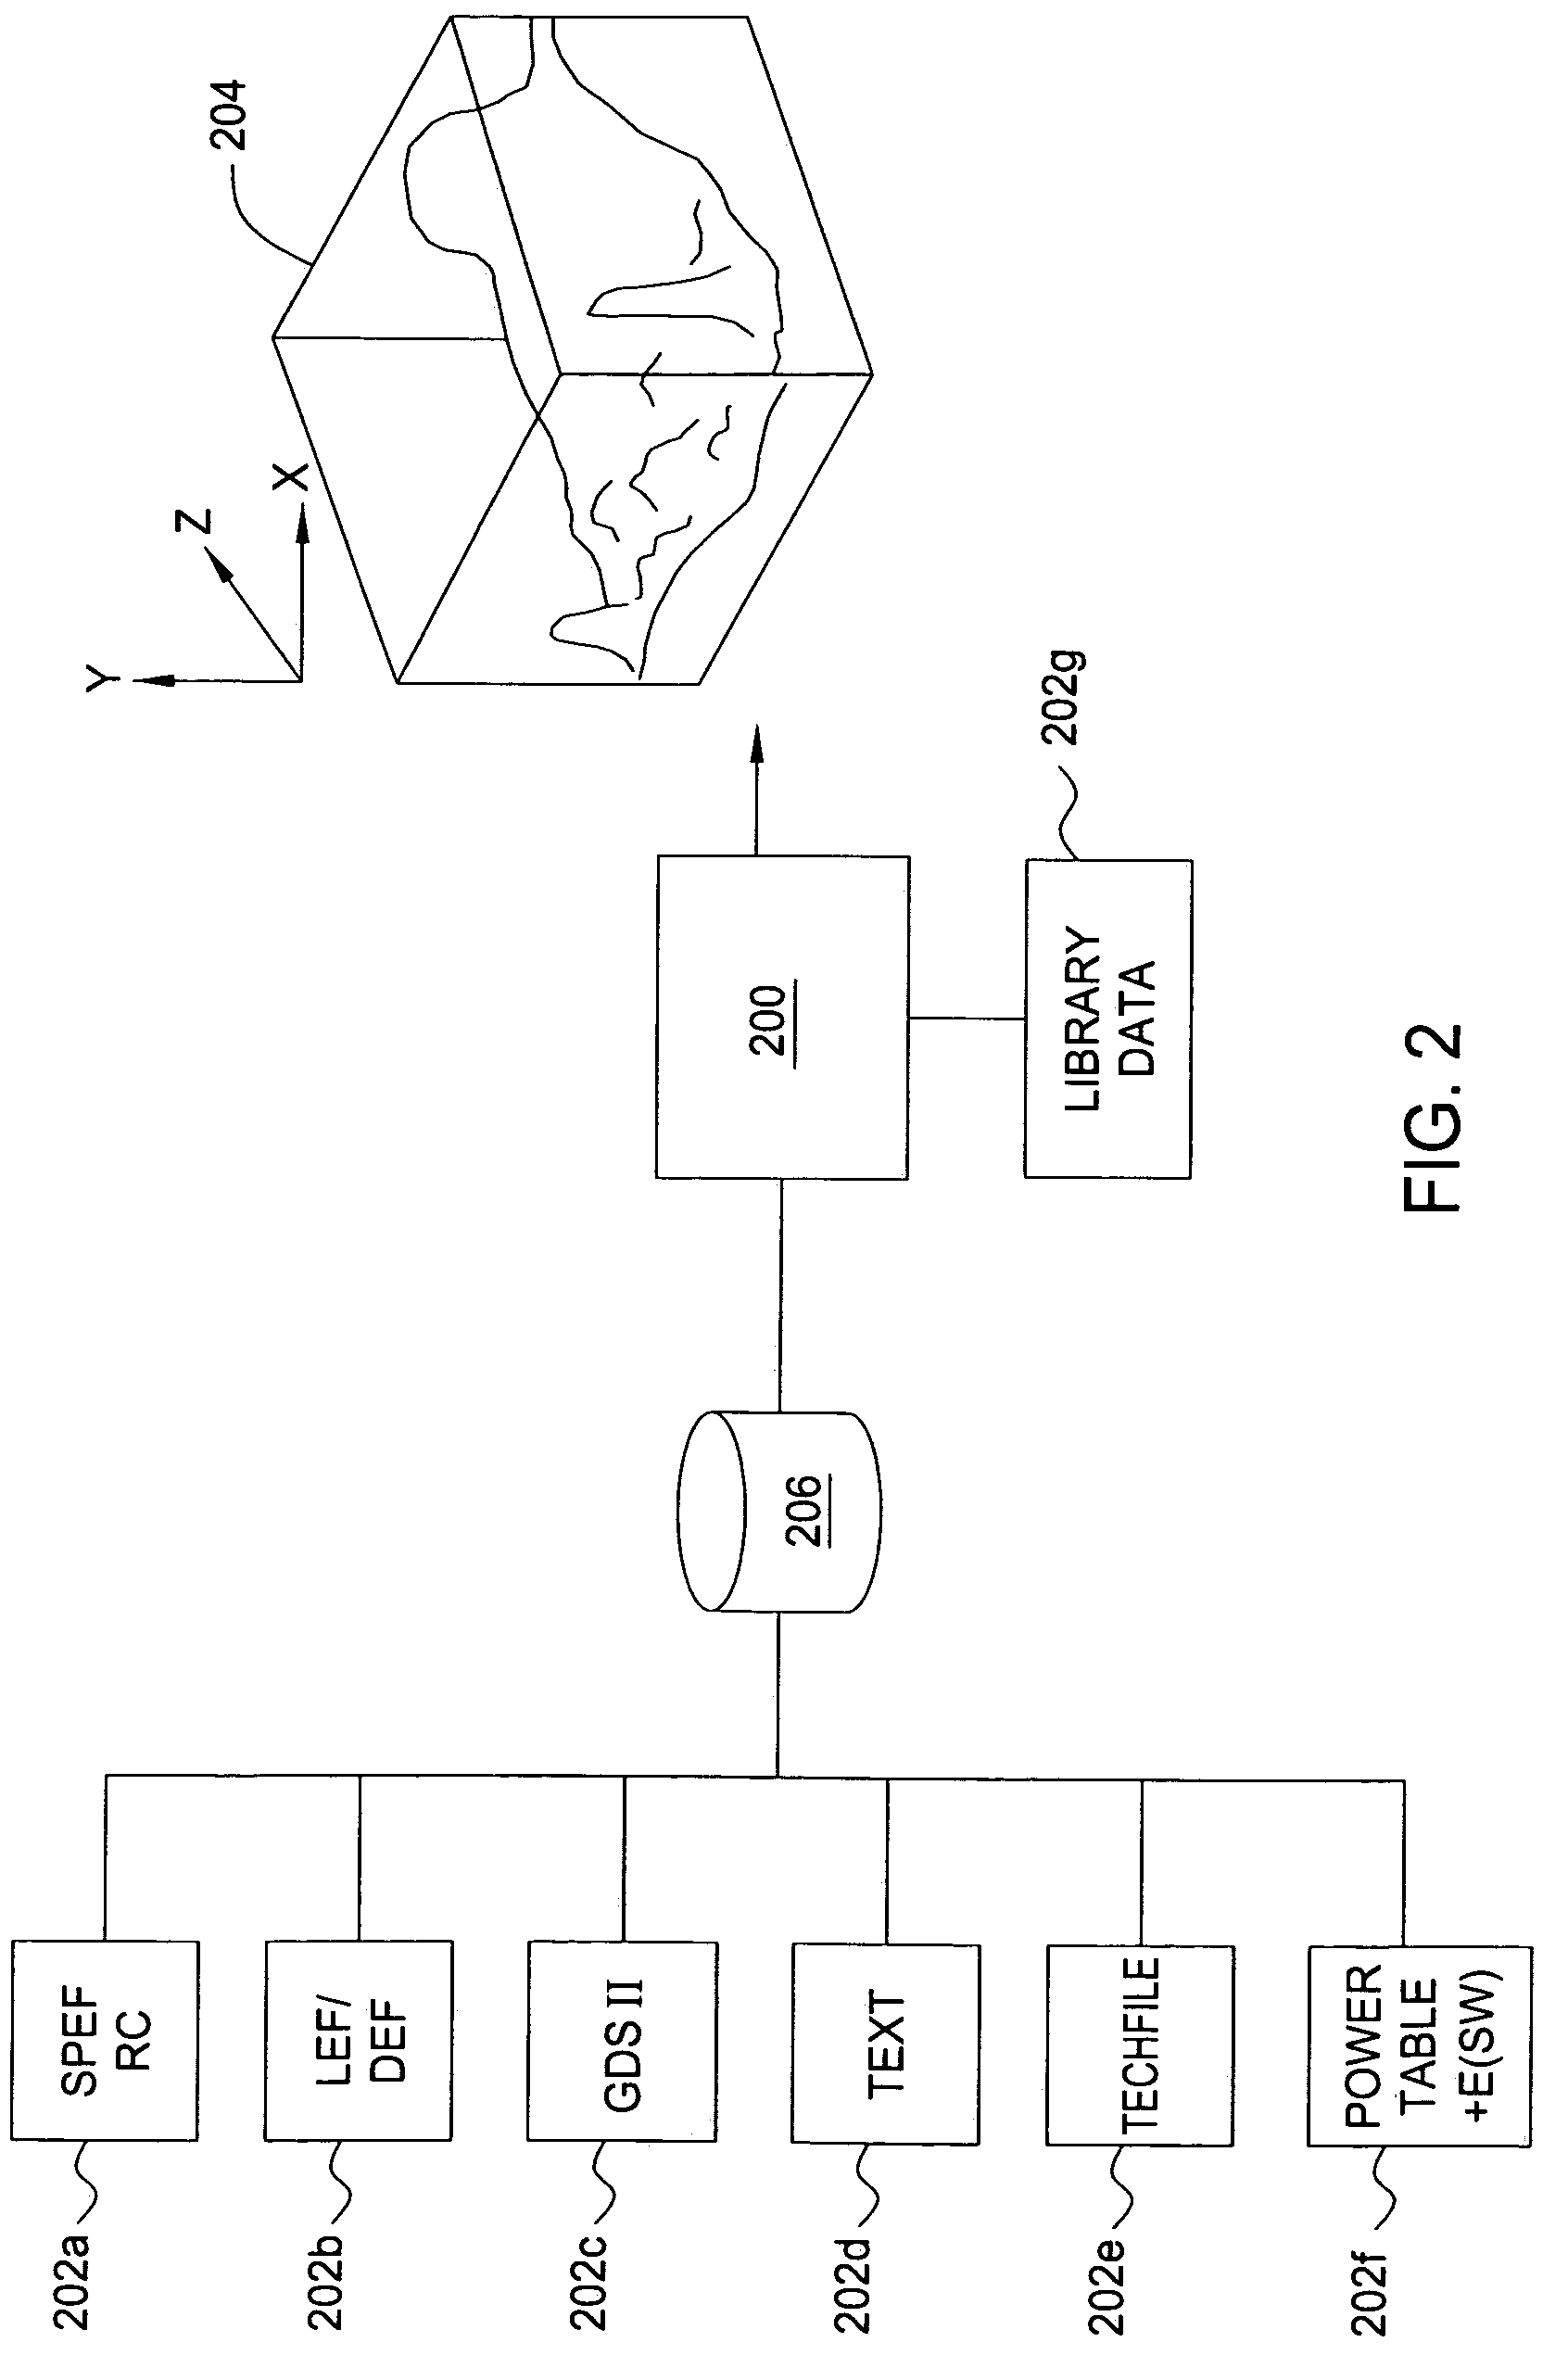 Method and apparatus for thermal modeling and analysis of semiconductor chip designs